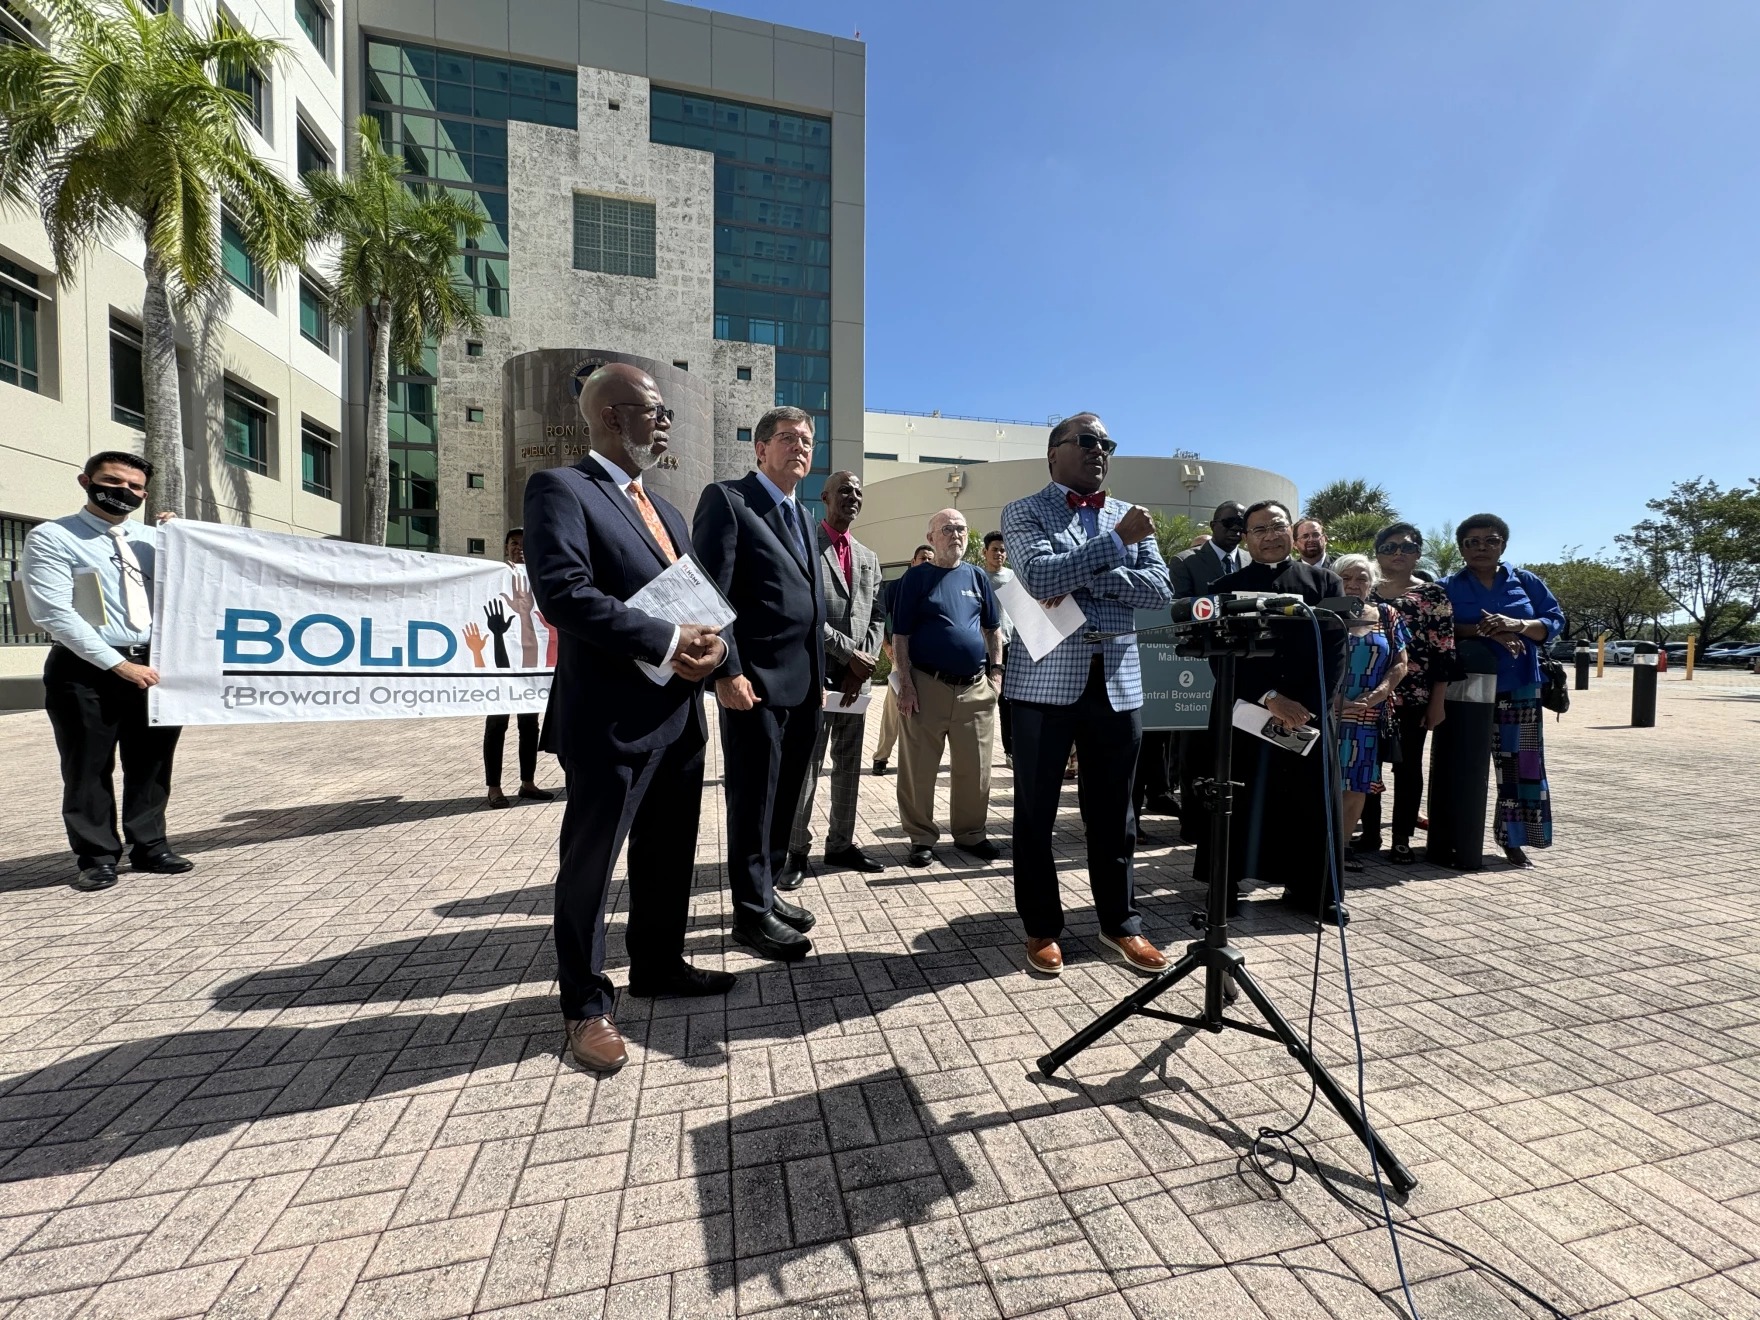 ‘Our faith is shaky’: Religious leaders say Broward Sheriff misled them on arrest diversion program